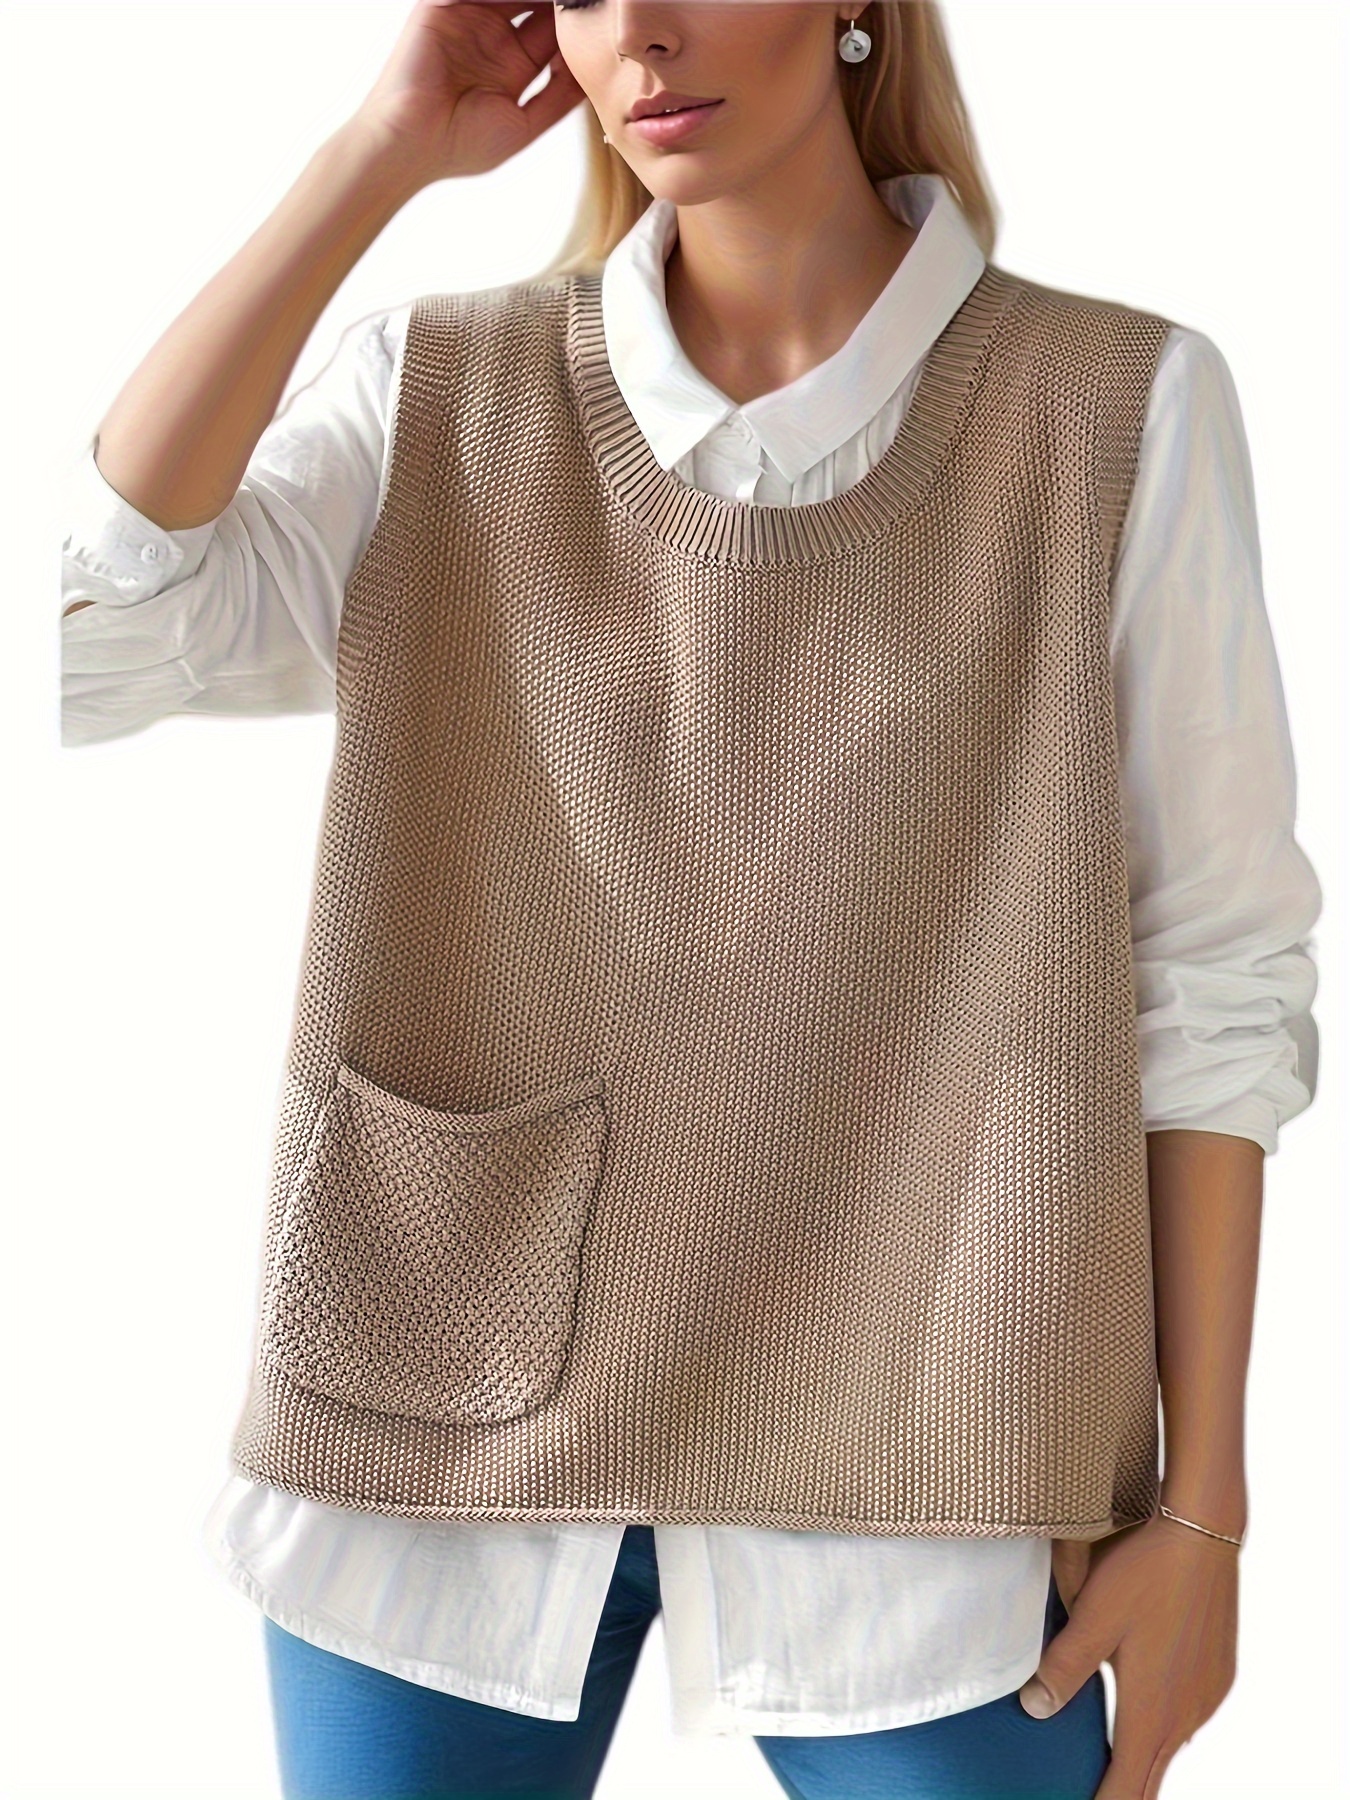 Solid Knitted Sweater Vest Woman Vintage Crop Top Vests For Women 2021  Autumn Loose Casual Sleeveless Sweaters For Women